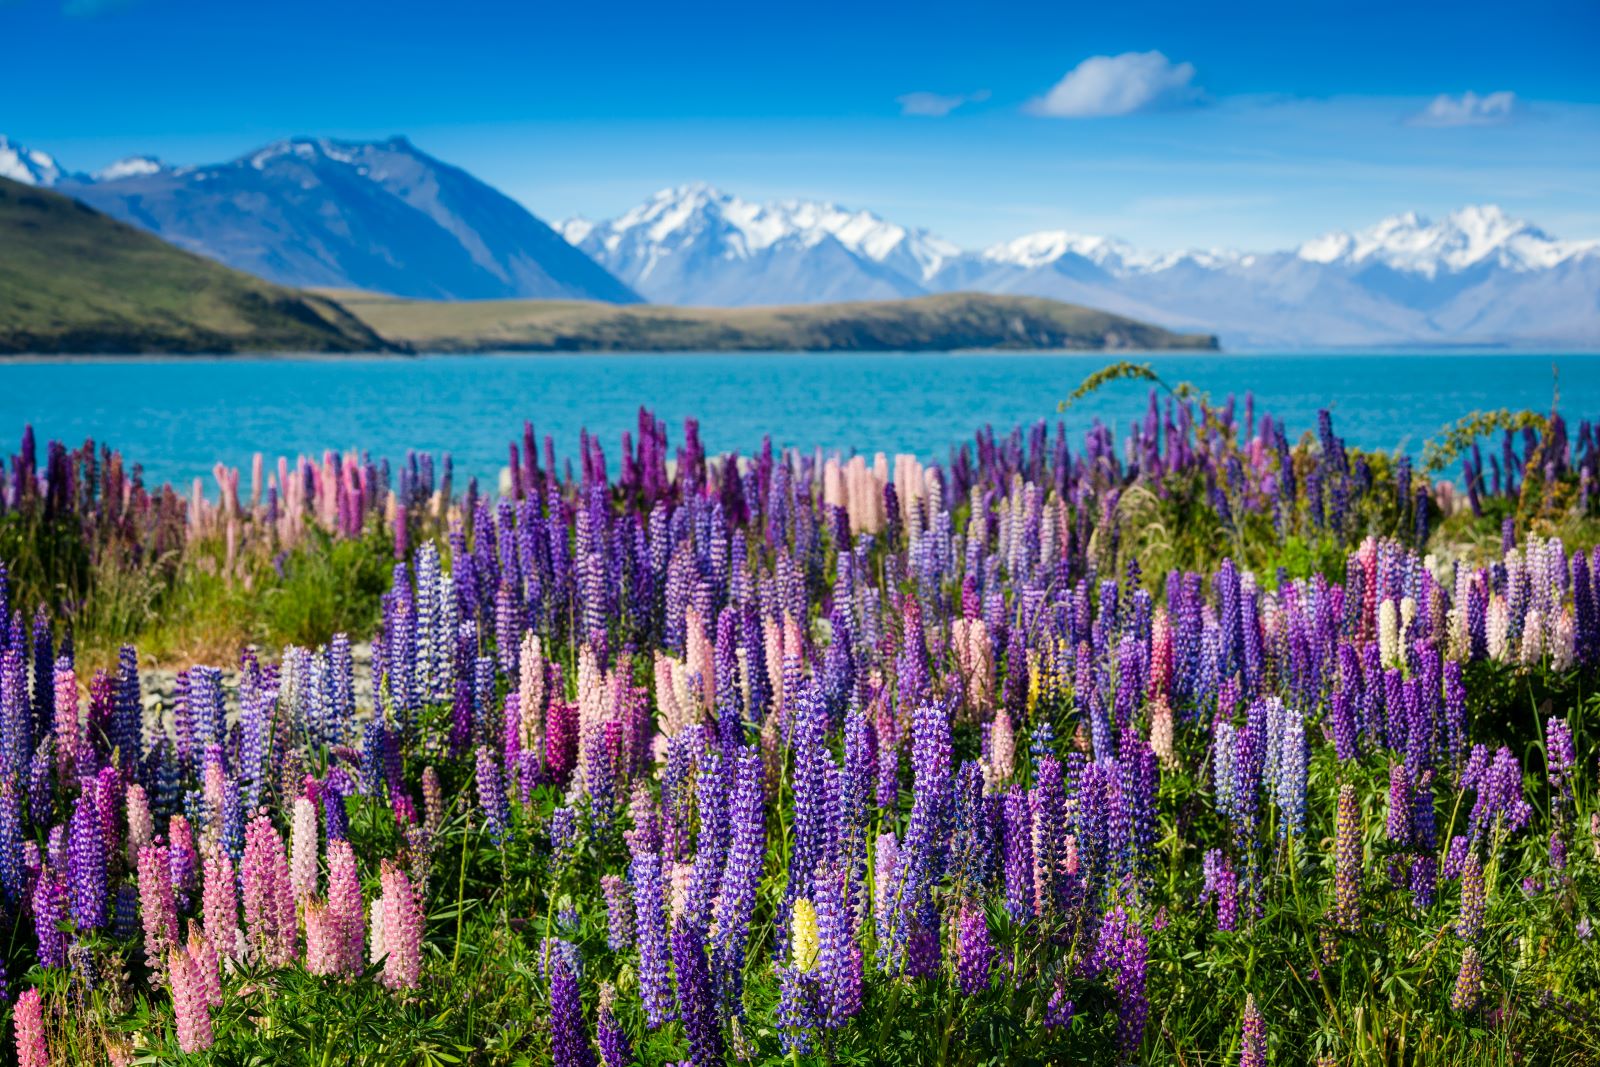 Lake Tekapo with lupins in the foreground.